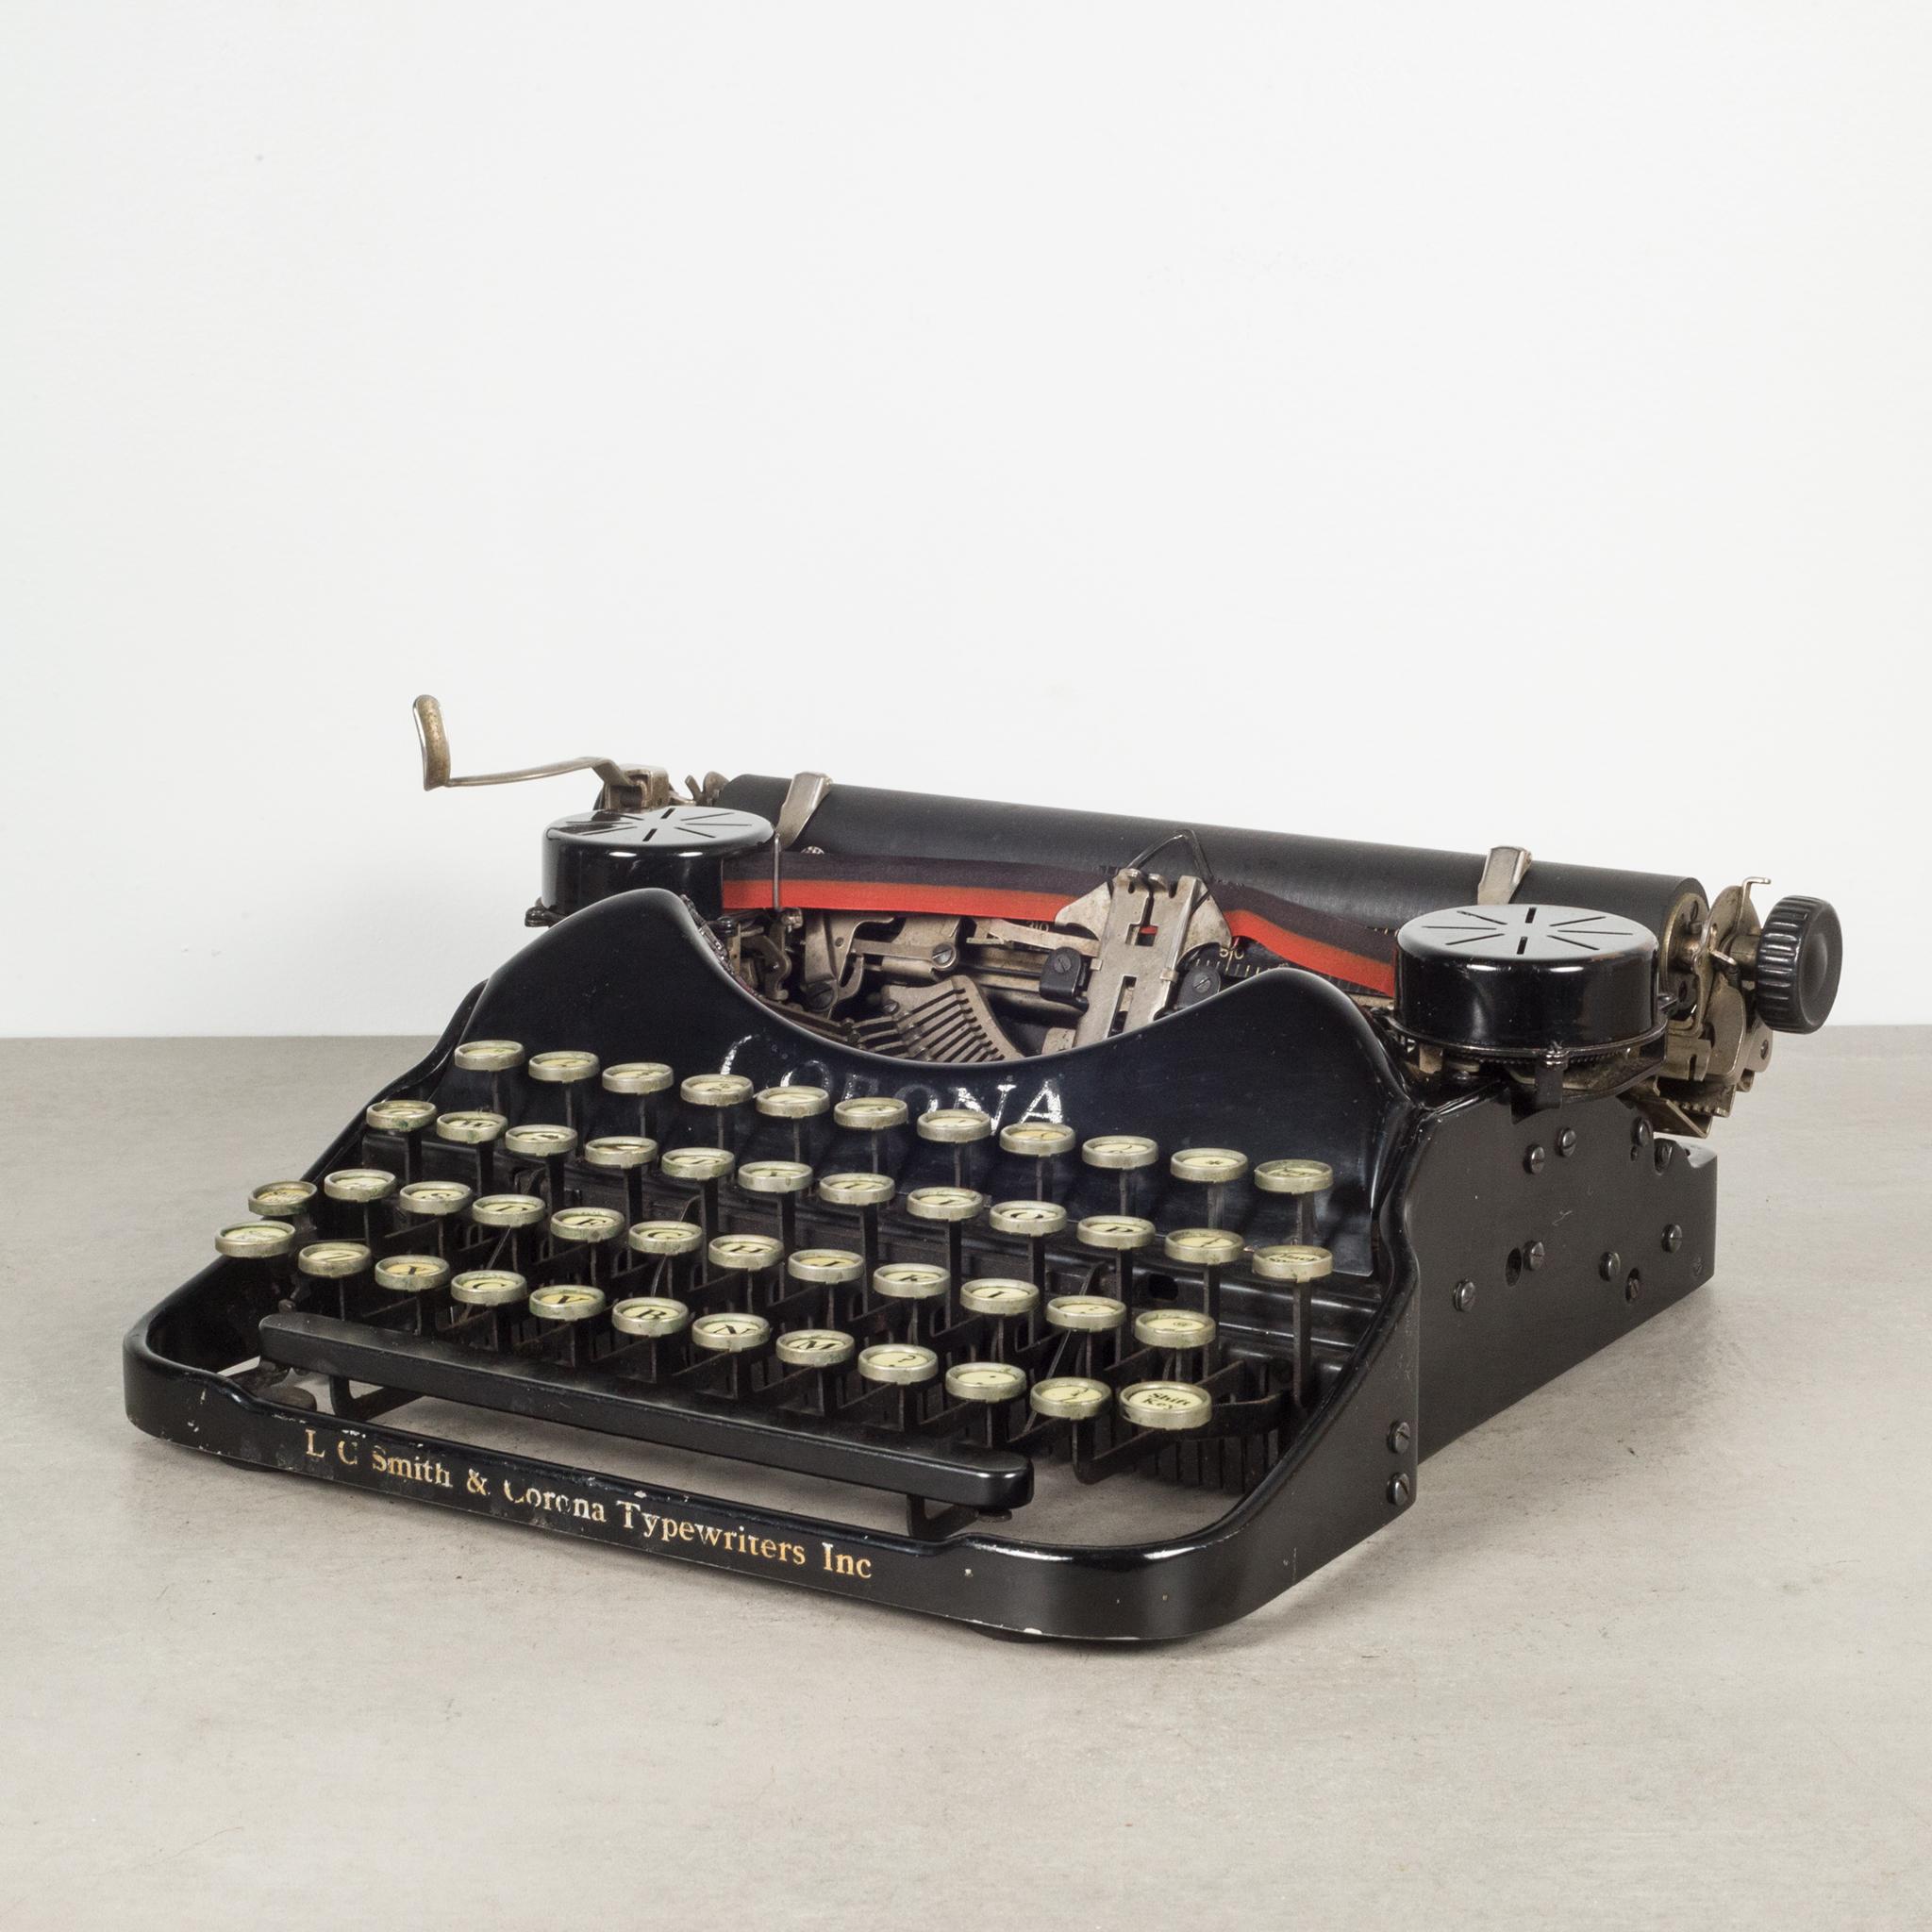 About

An Art Deco Corona 4 bank typewriter with original case. The keys are nickle with pale green porcelain interior and black letters. This typewriter has has smooth typing and functions very well. It has retained its original finish with minor